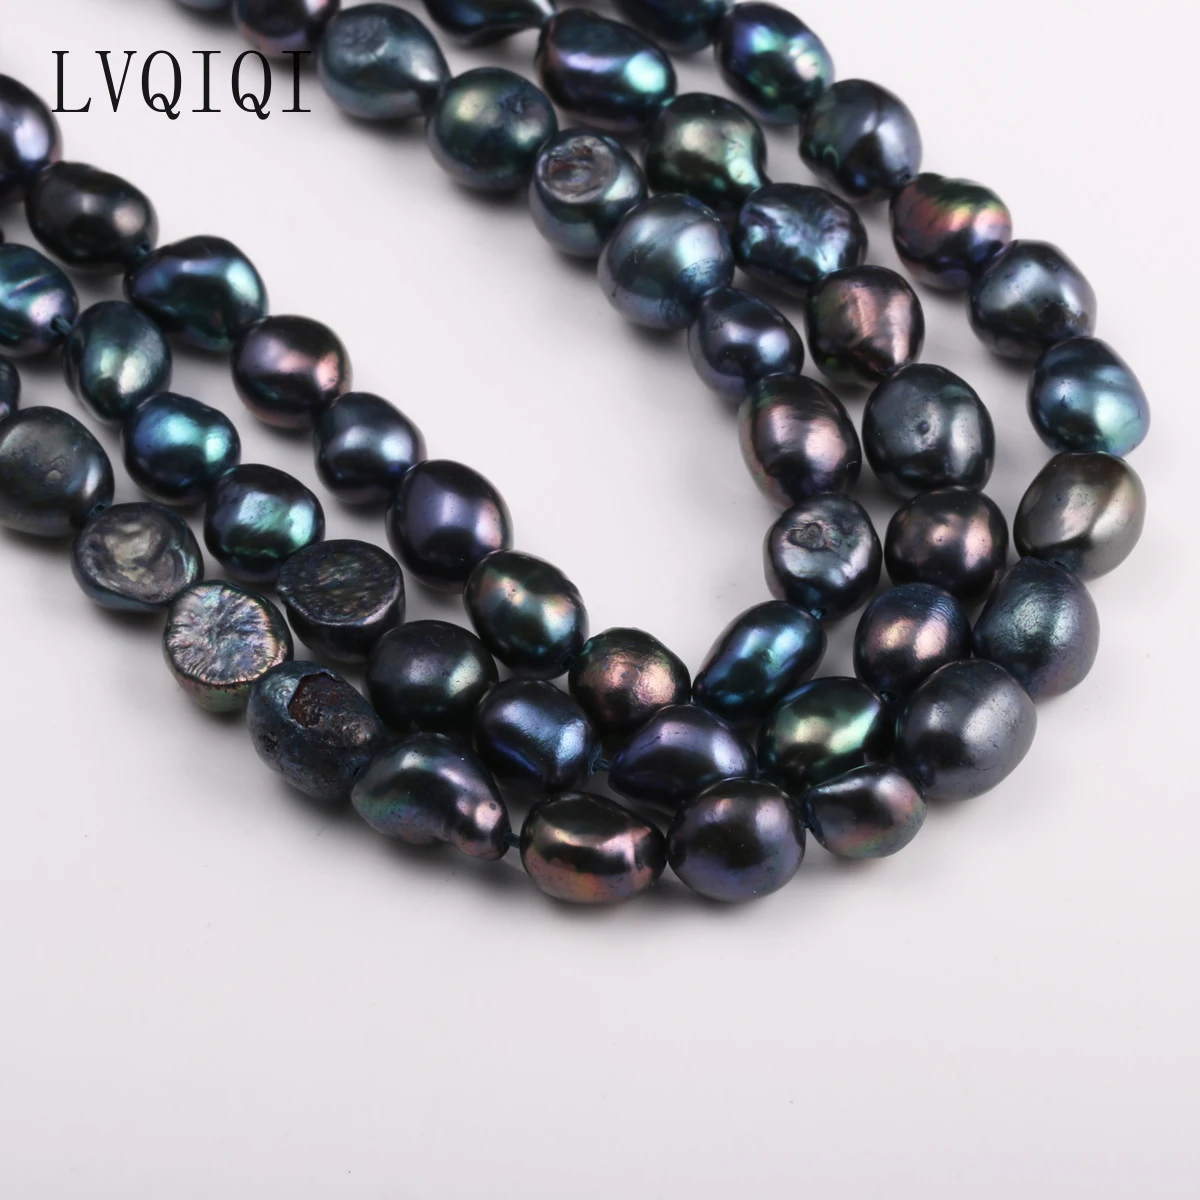 

LVQIQI 100% Natural Freeform Freshwater Cultured Pearls Beads DIY Beads for Jewelry Making DIY Strand 15 Inches Size 6mm-7mm